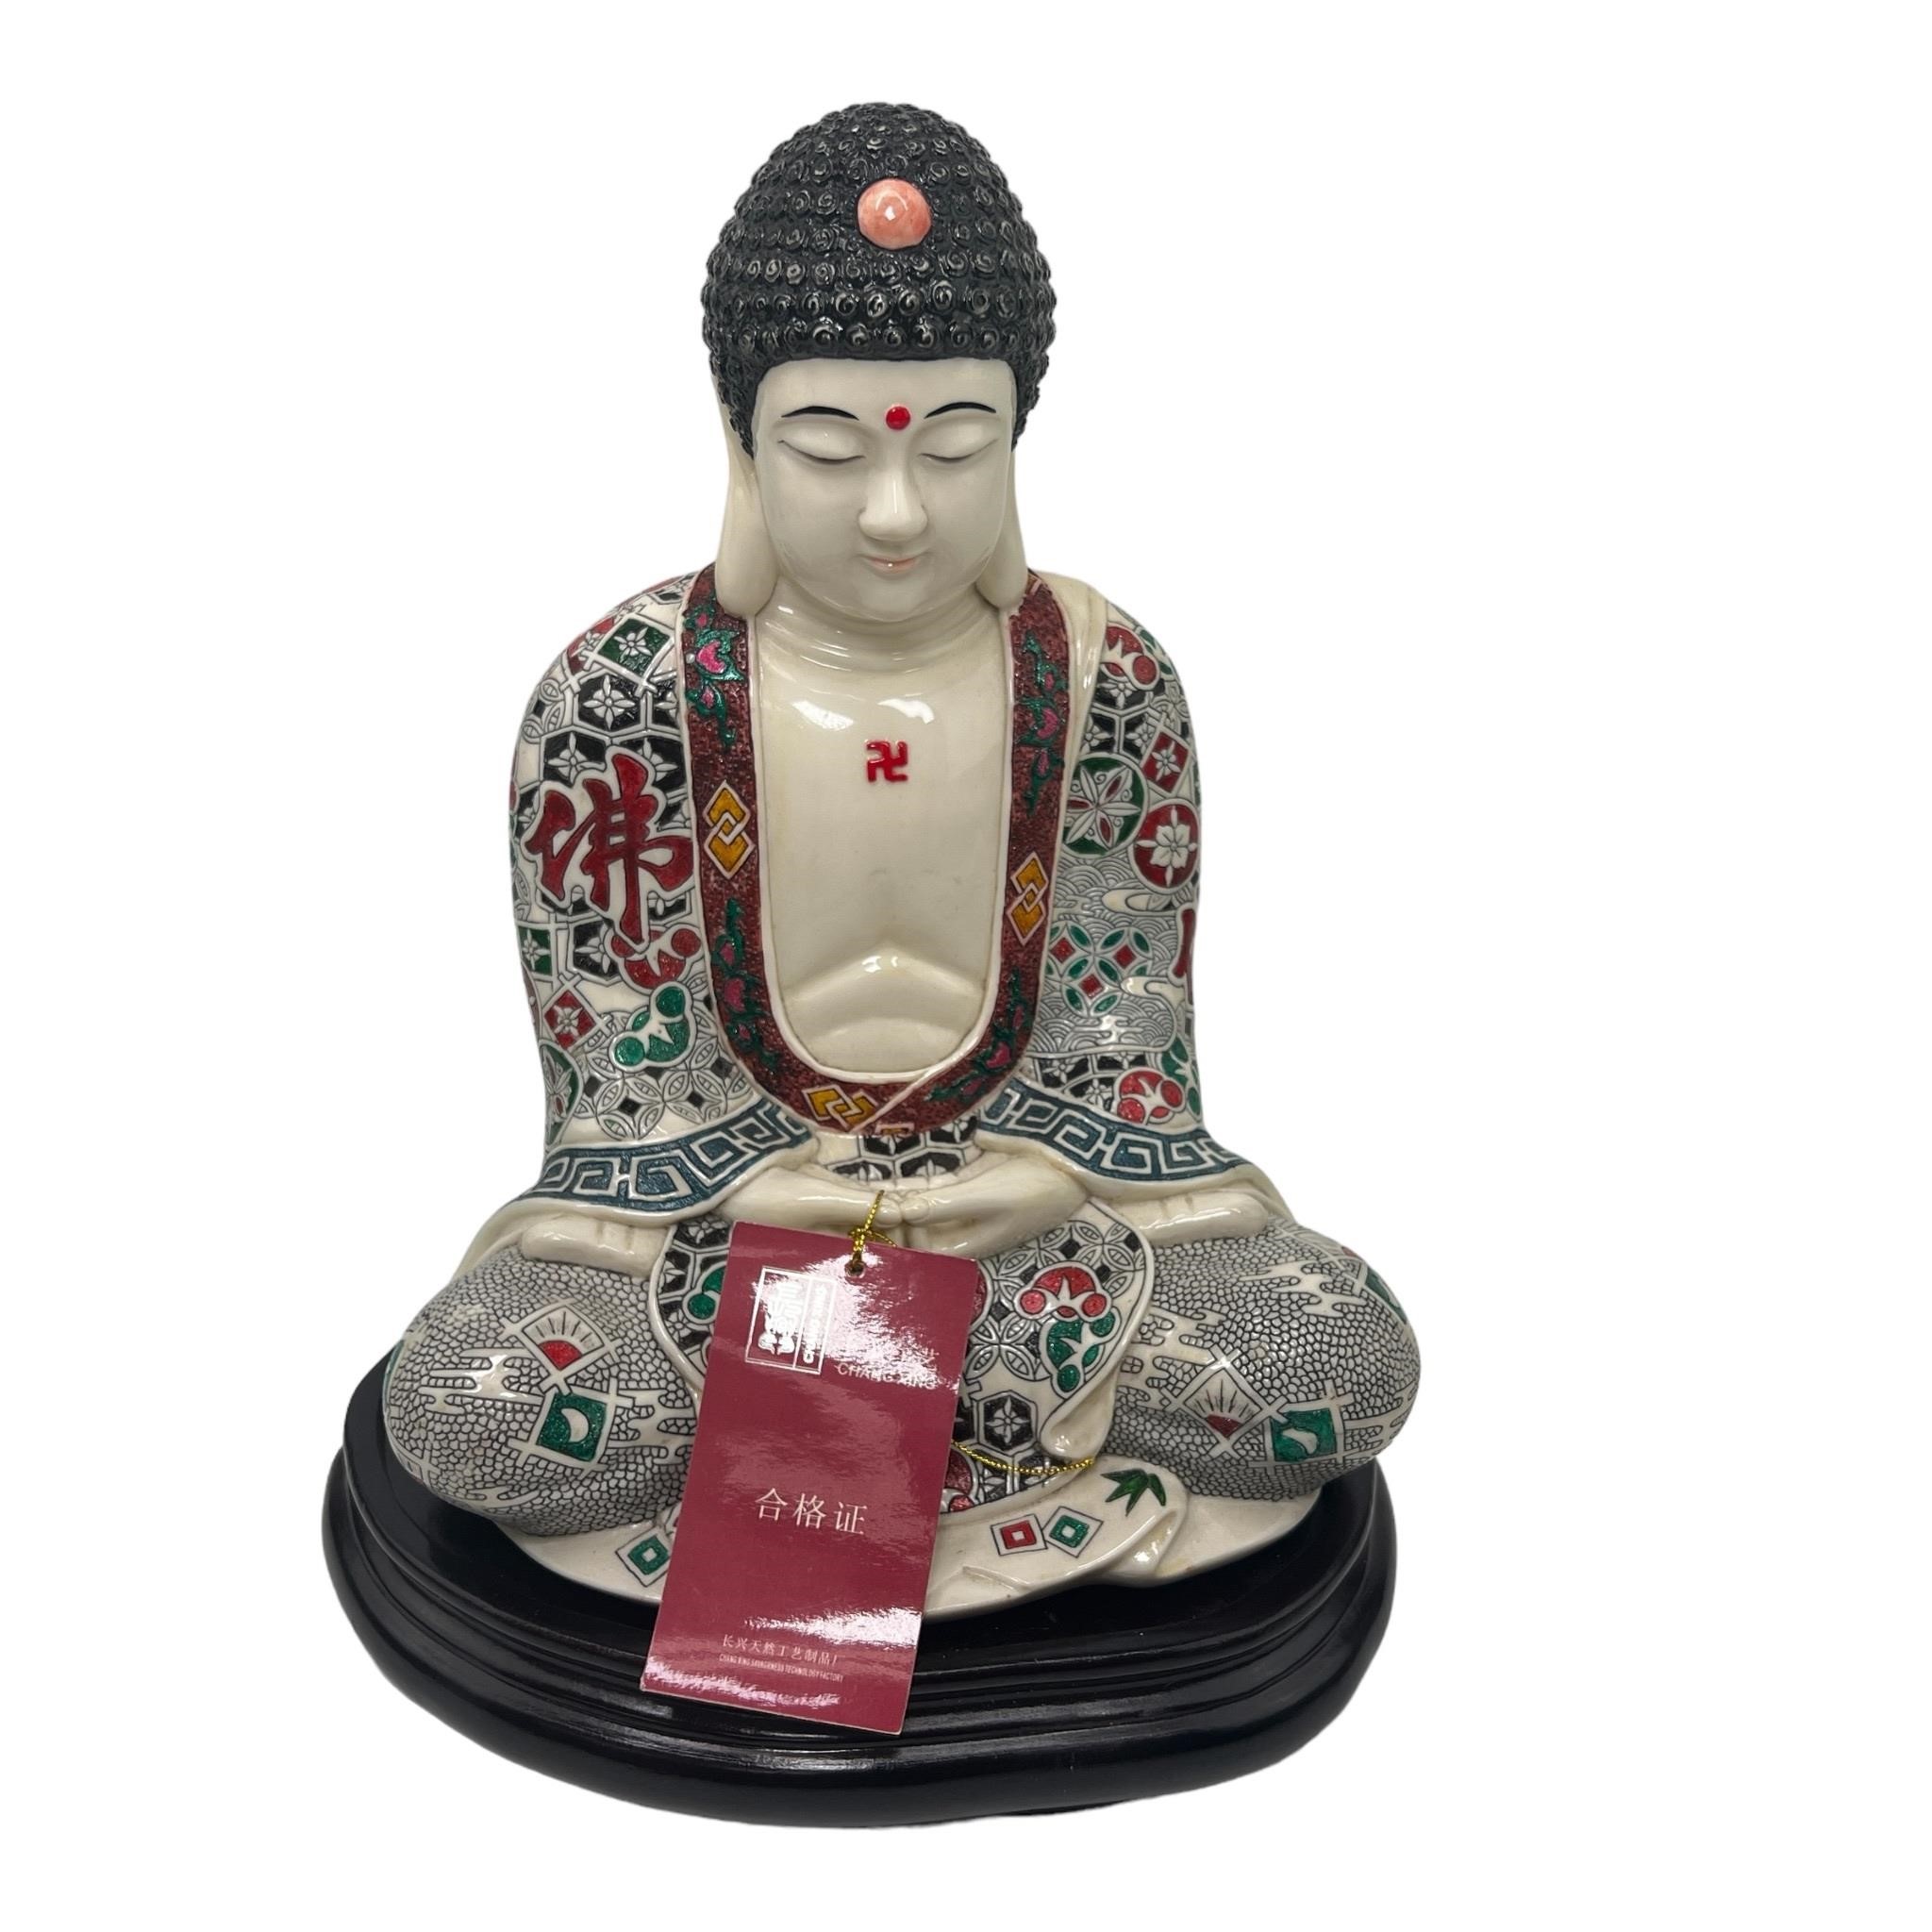 Meditating Buddha Statue with Stand - Resin